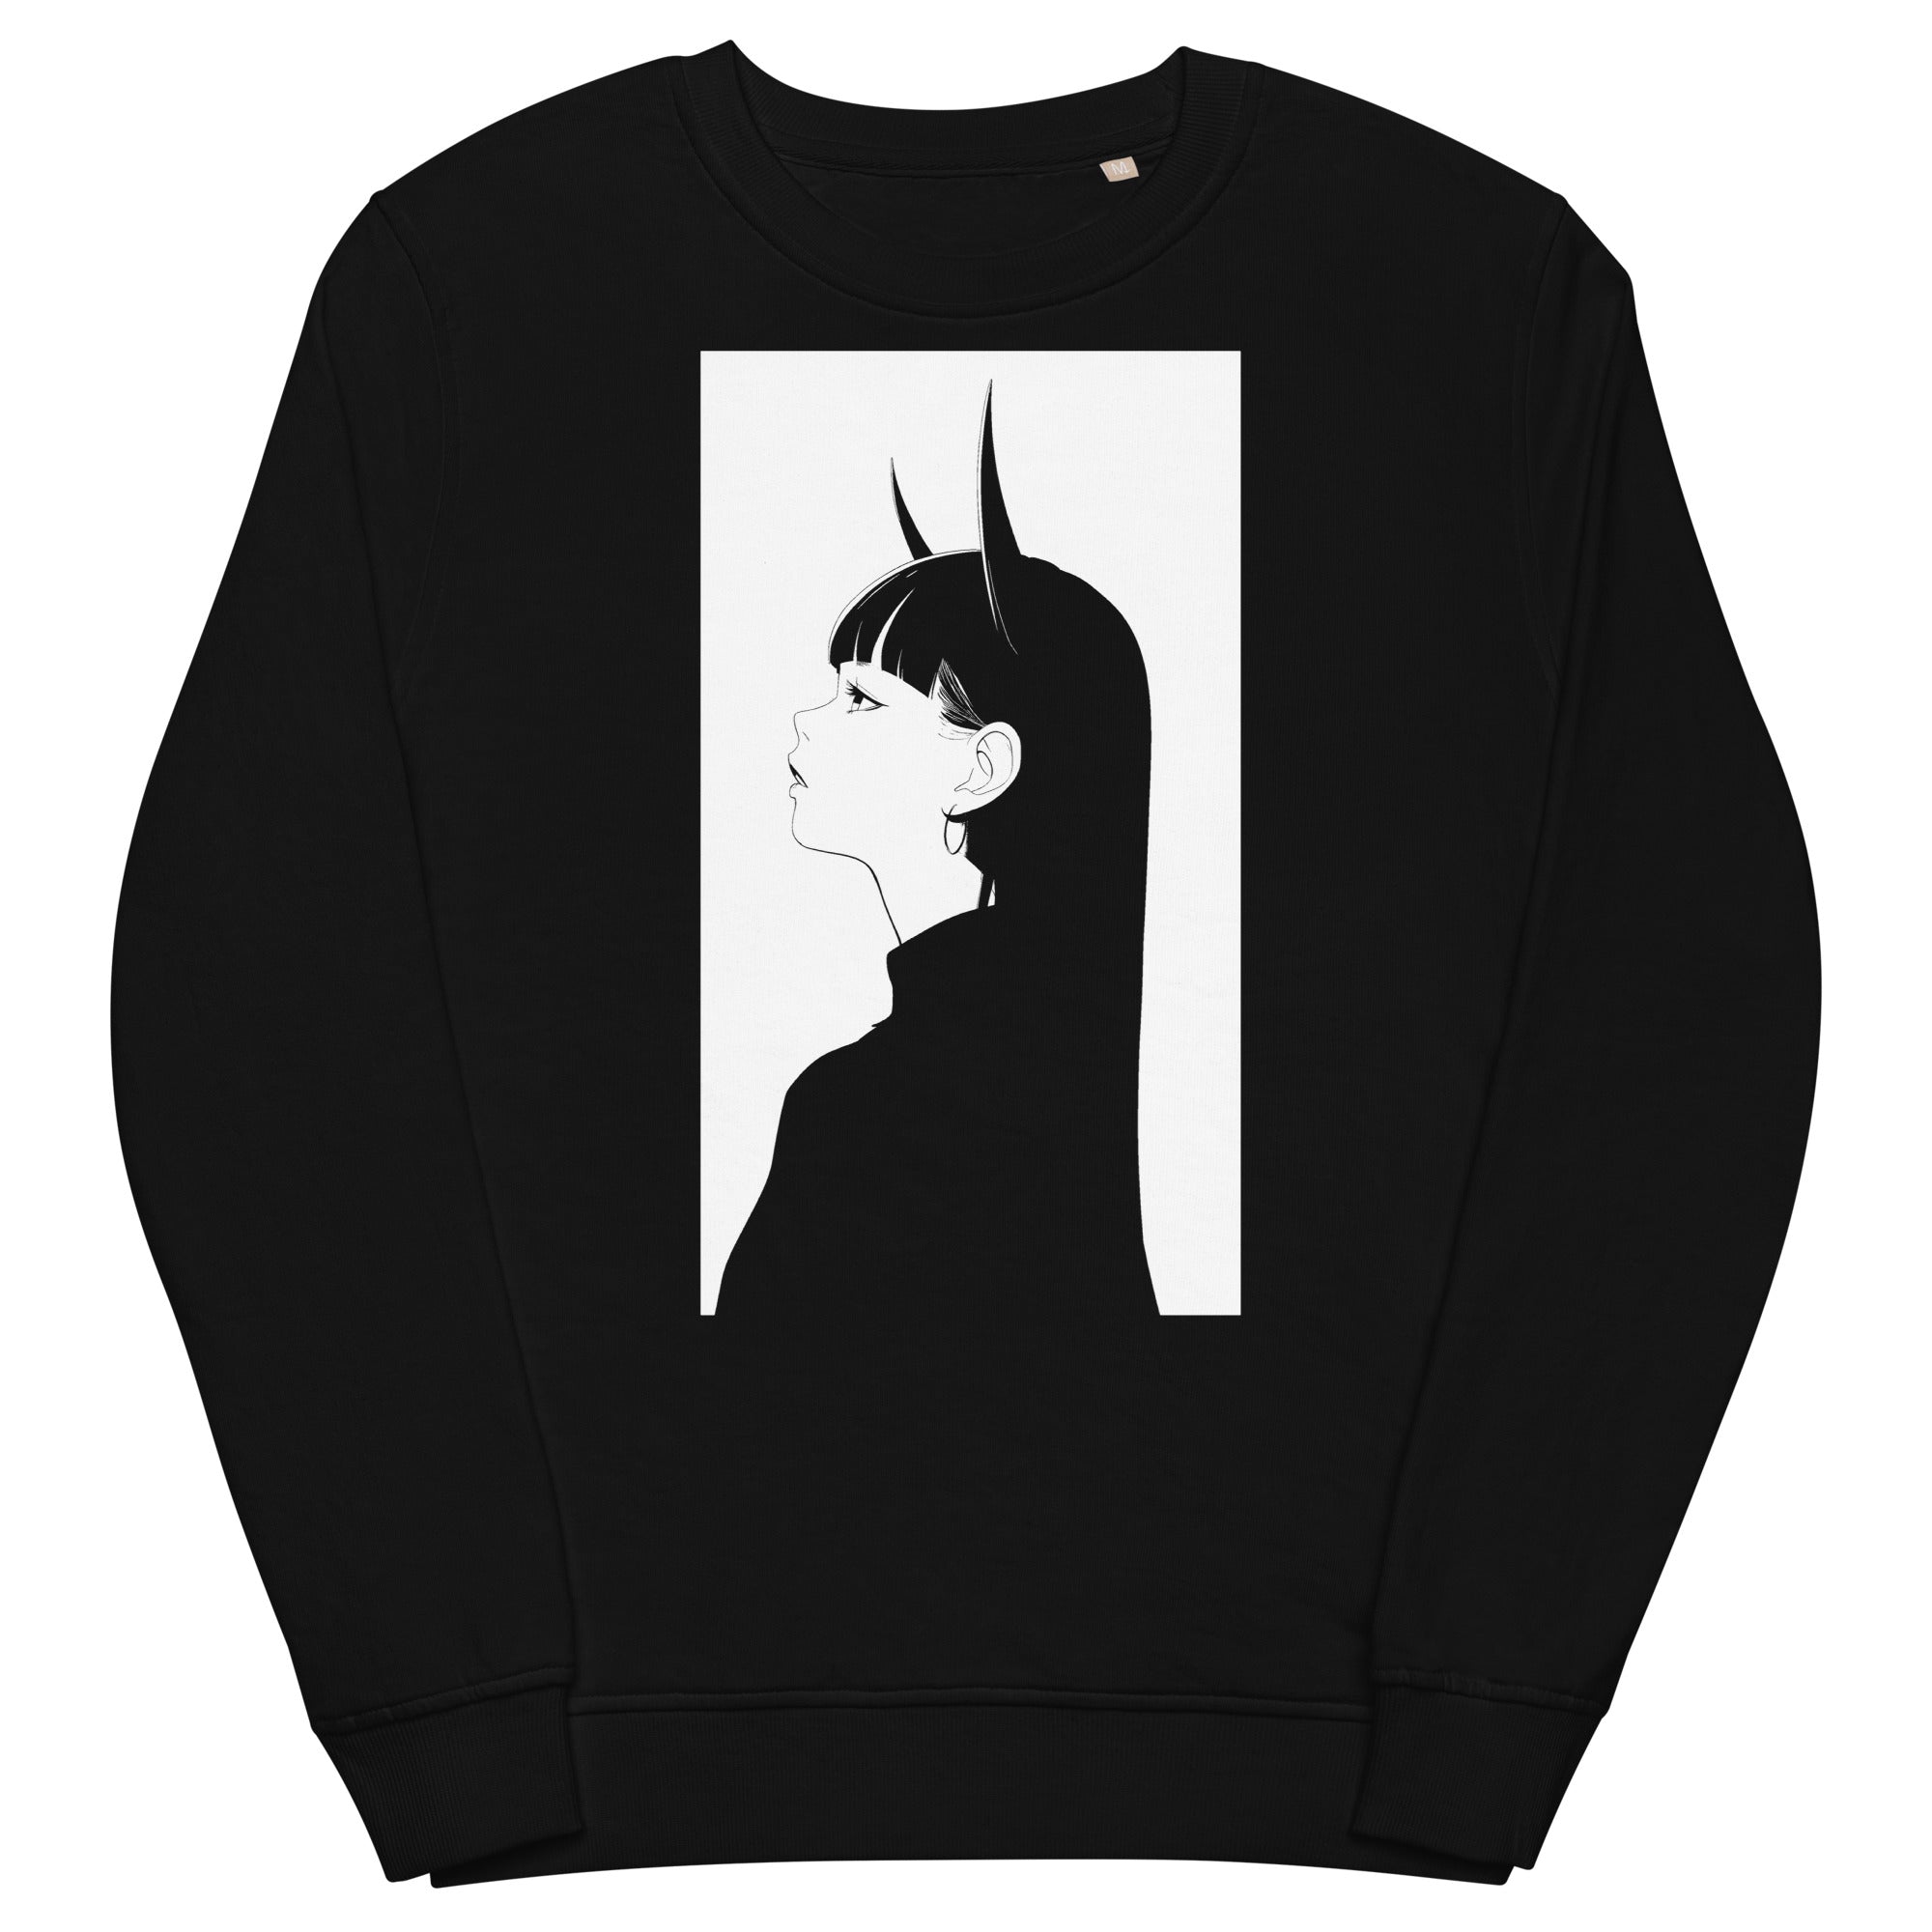 Unisex black sweatshirt featuring a minimalist anime design of a girl with long hair and prominent horns, displayed on a white rectangular background on the front.